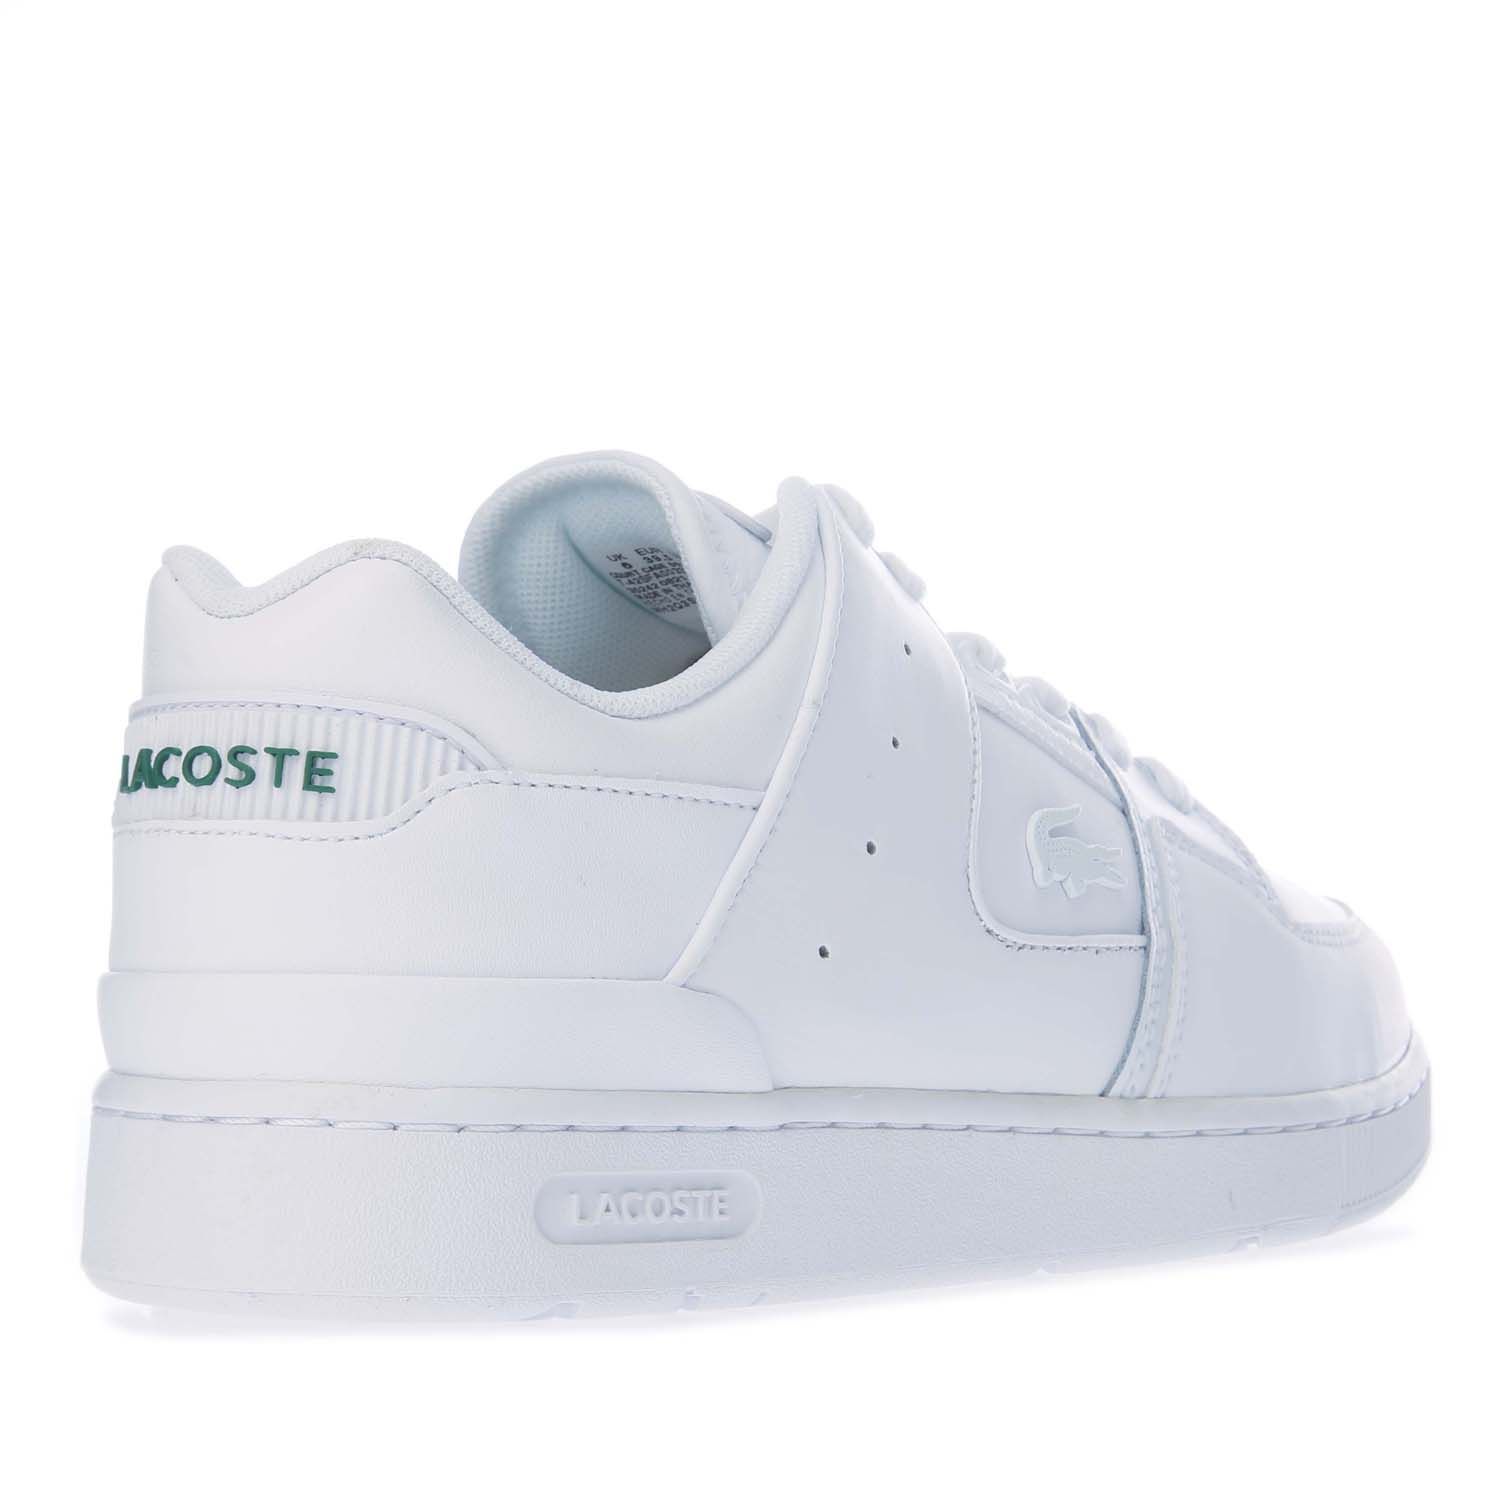 Womens Lacoste Court Cage Trainers in white.- Leather upper.- Lace up fastening.- Padded tongue and cuff.- Ortholite sockliner for comfort and odour control.- Low-profile design.- Lacoste branding at tongue.- Contrast heel patch with Lacoste lettering.- Perforated toe vamp.- Textured grip tread.- Durable rubber outsole.- Leather upper  Textile lining  Synthetic sole.- Ref: 742SFA003321G